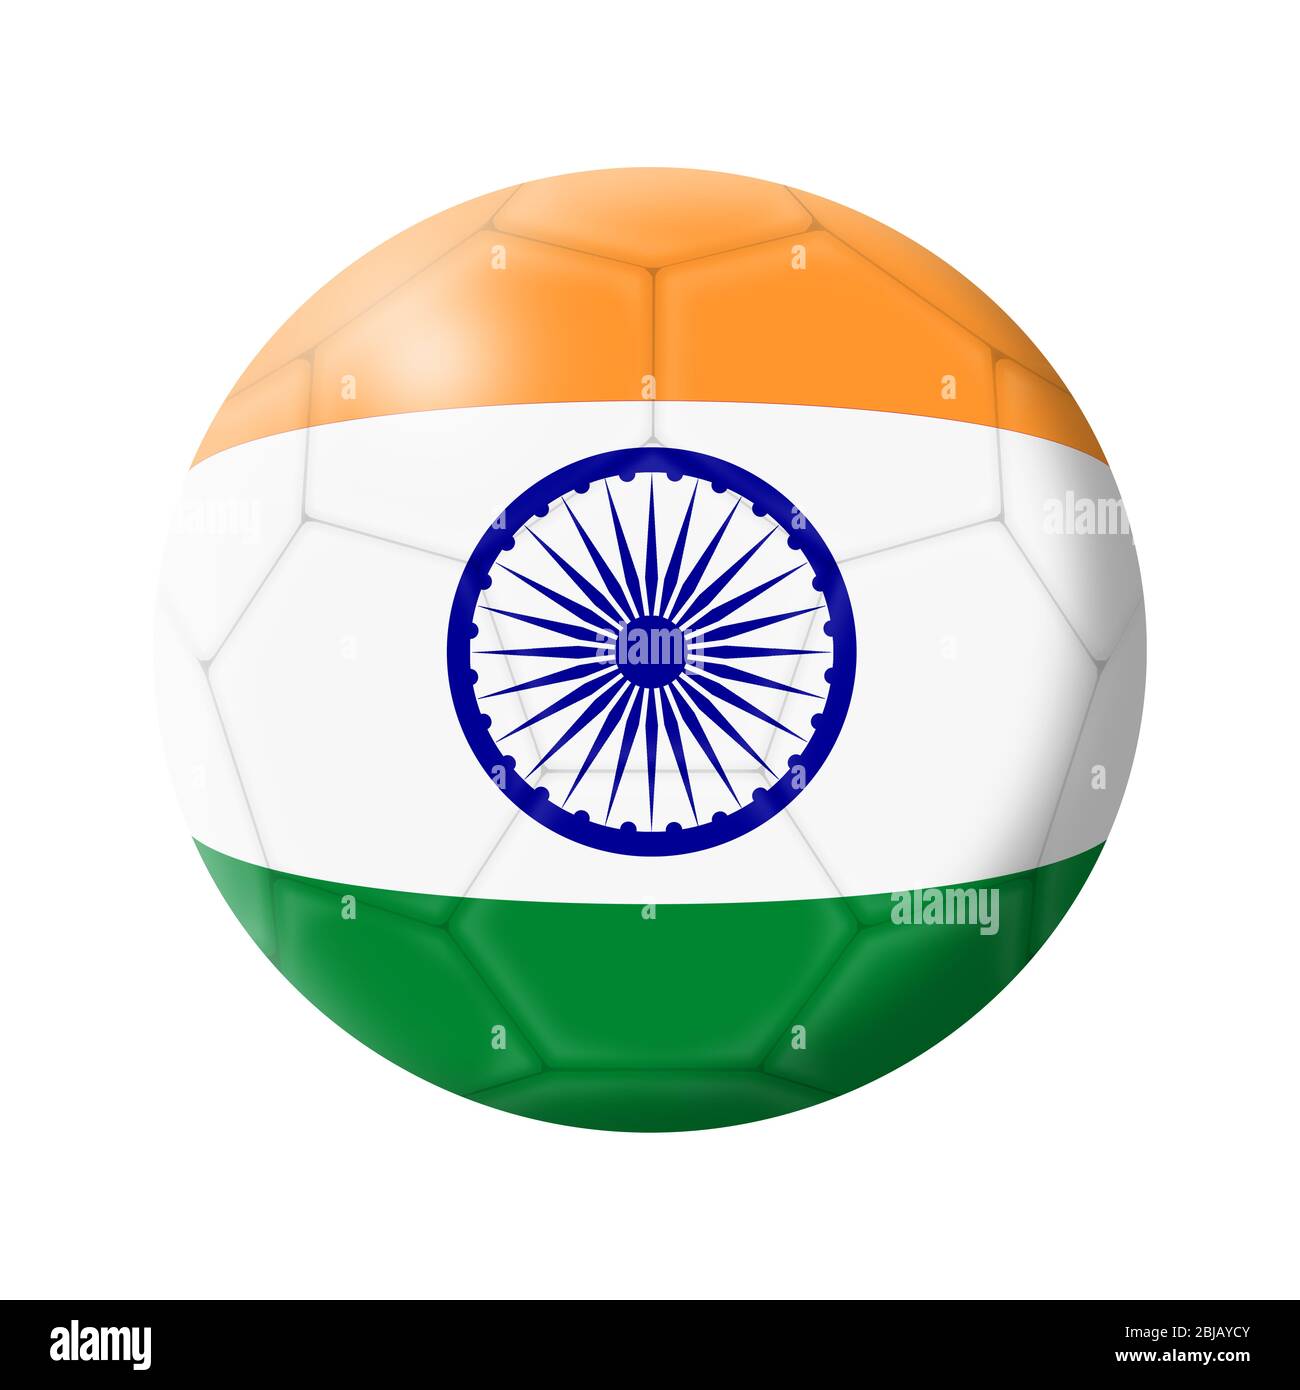 An India soccer ball football illustration isolated on white with clipping path Stock Photo